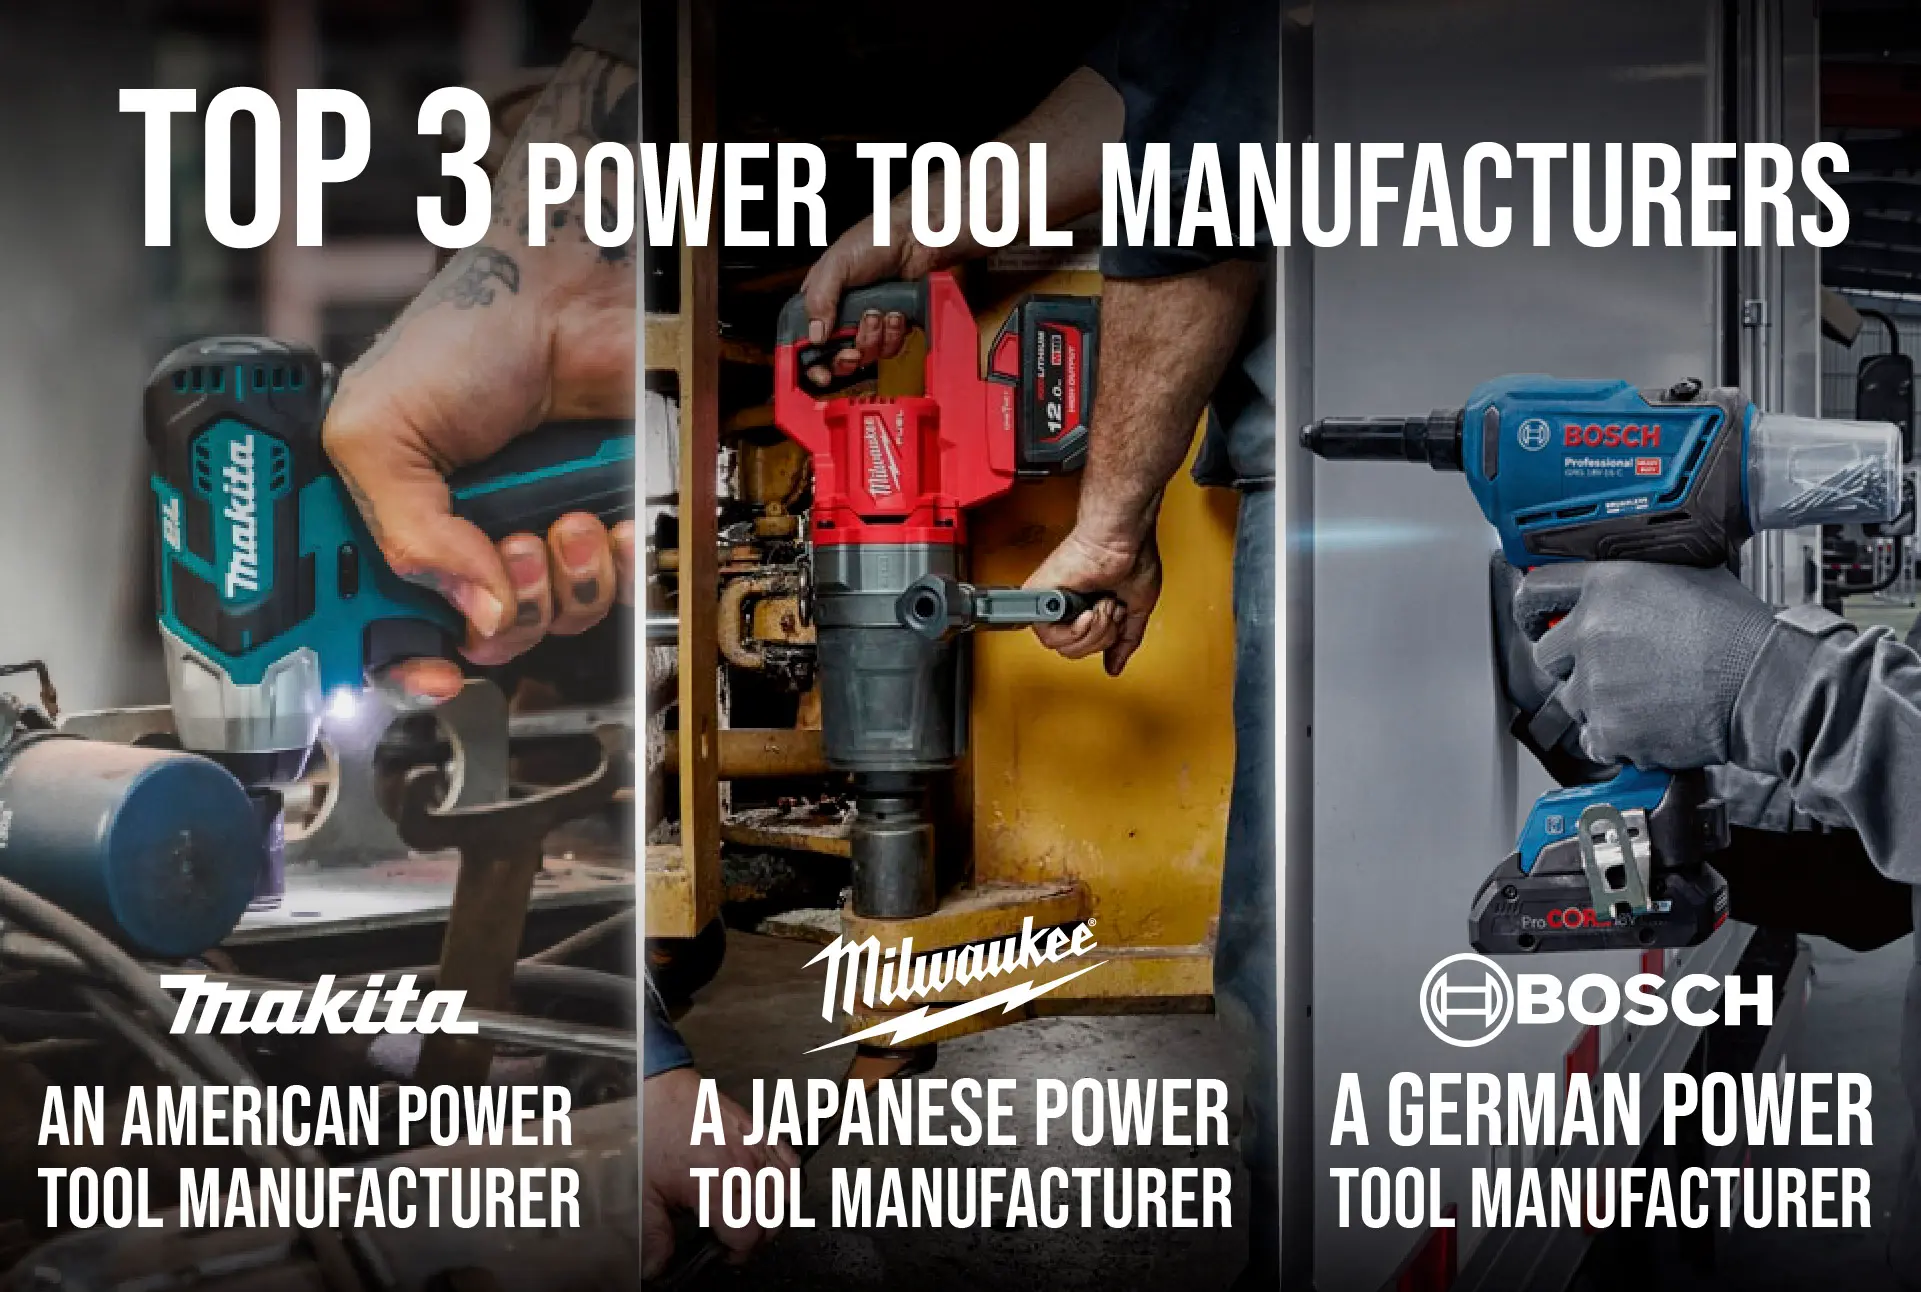 An Infographic about Top Power Tool Manufacturers